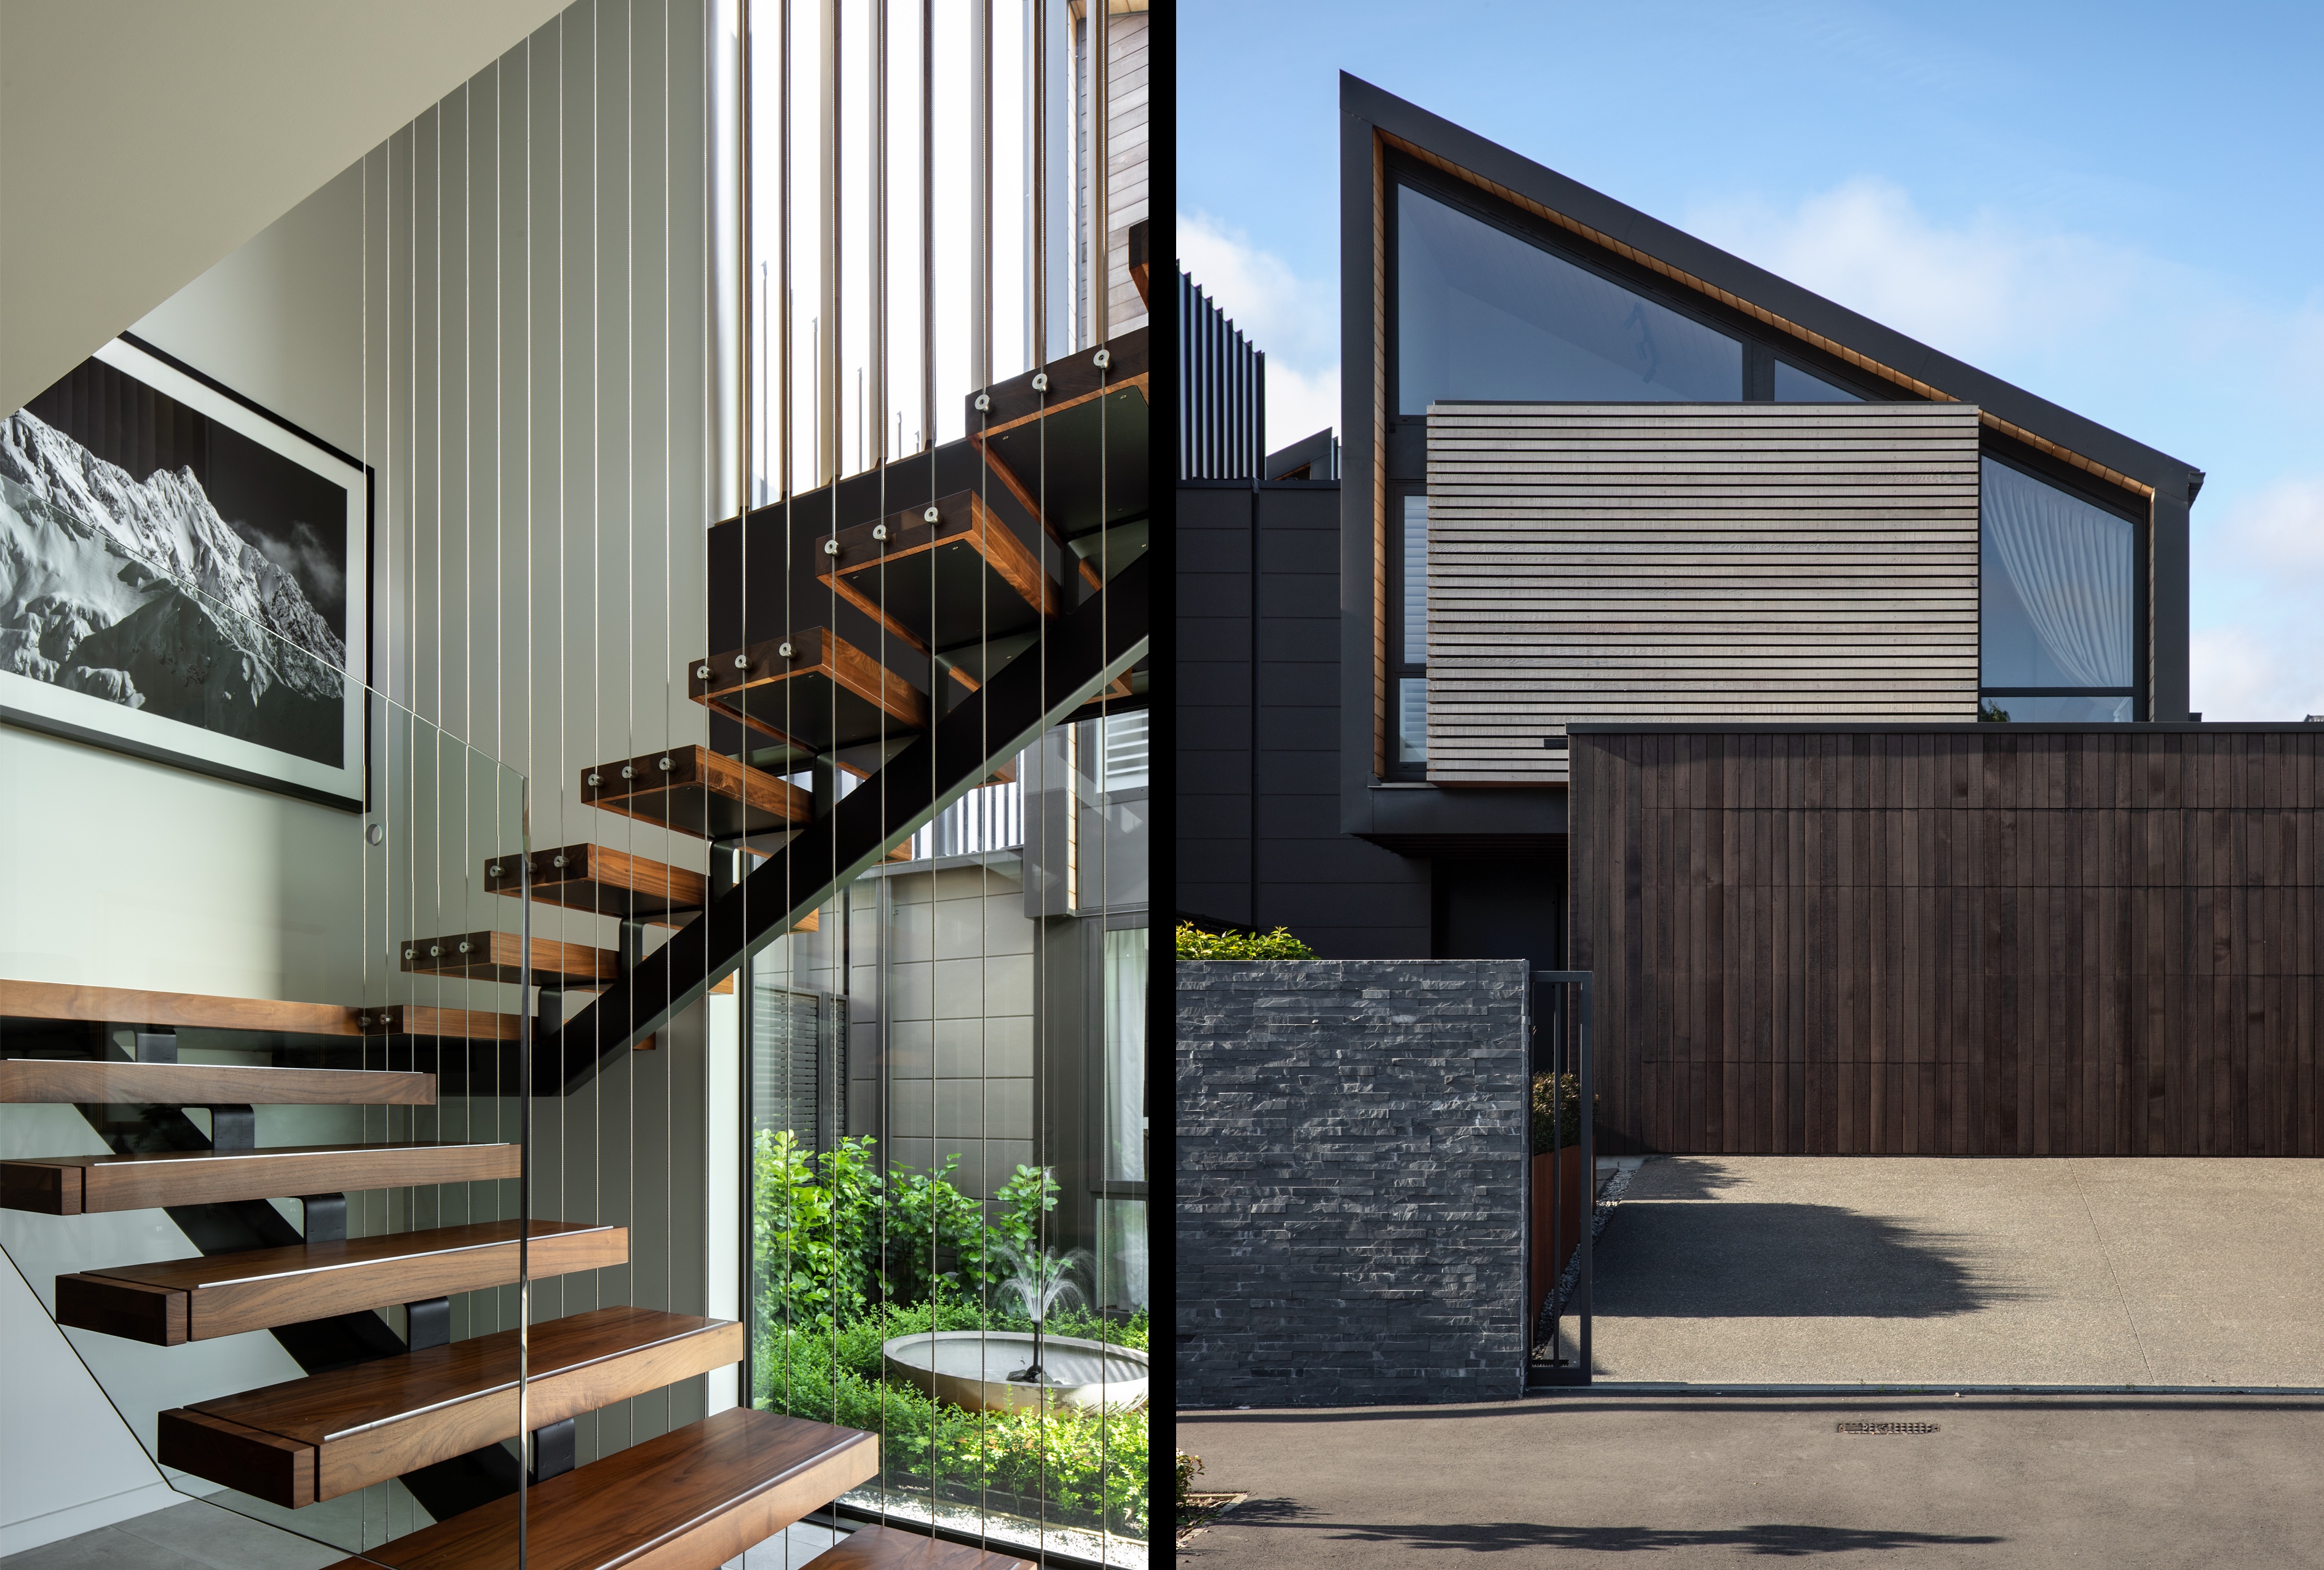 Split image with floating staircase on the left, and an exterior shot on the right depicting steep angled roof an timber cladding